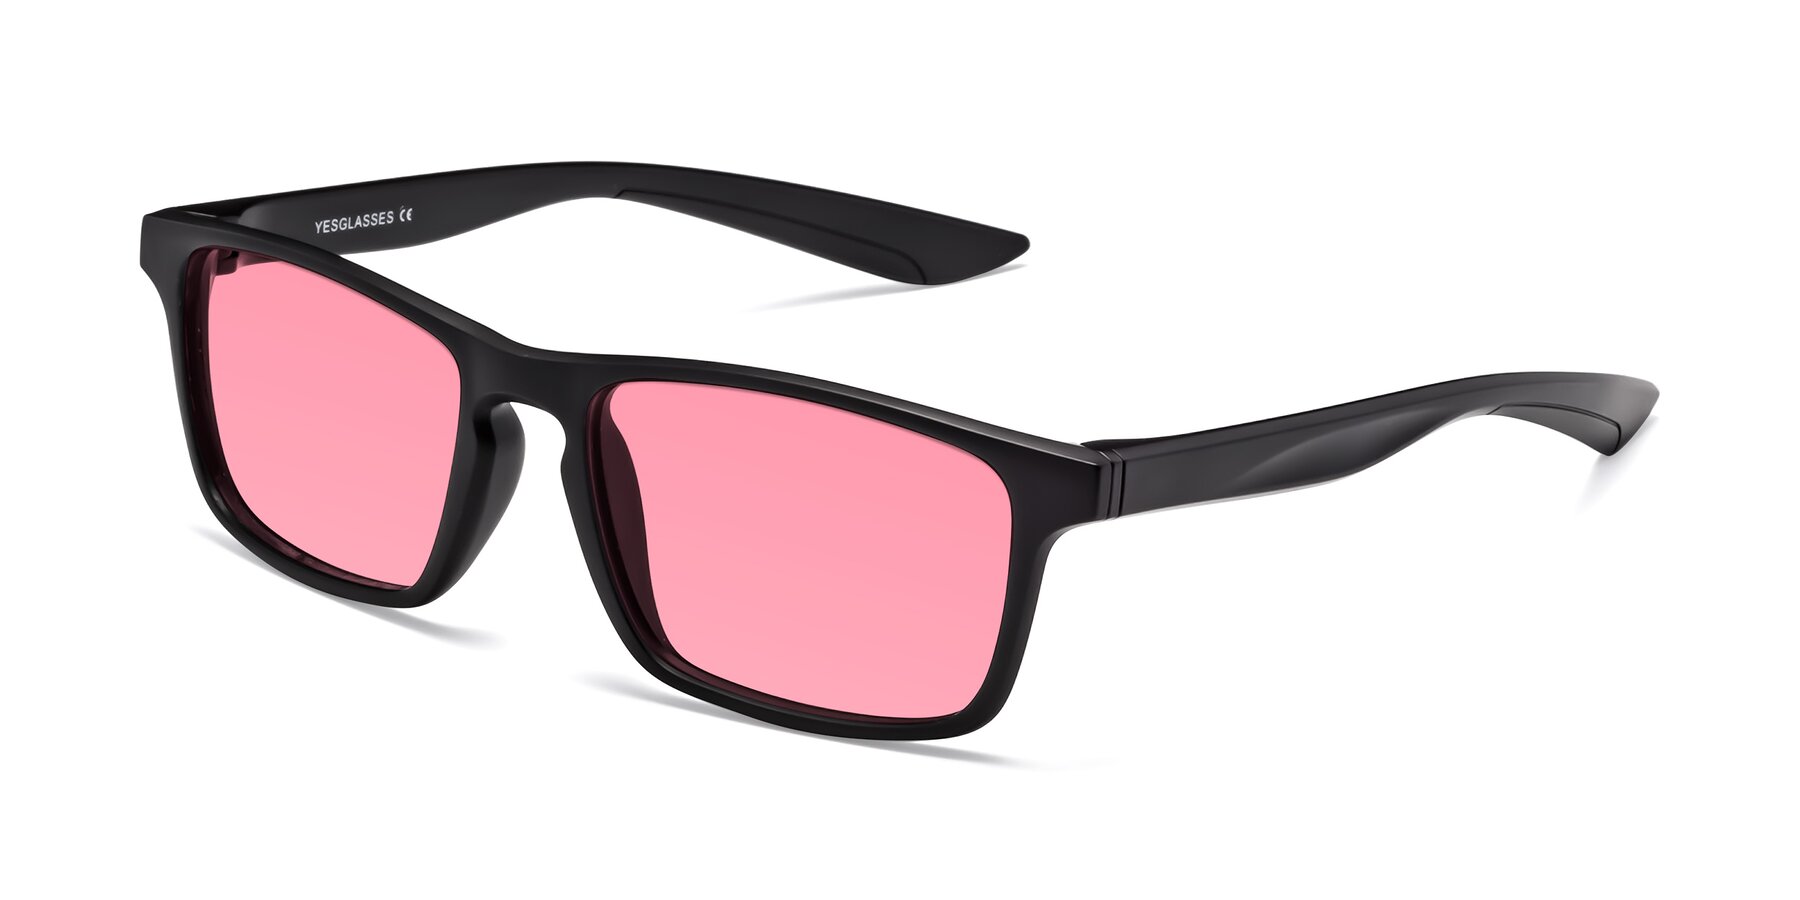 Angle of Passion in Matte Black with Pink Tinted Lenses